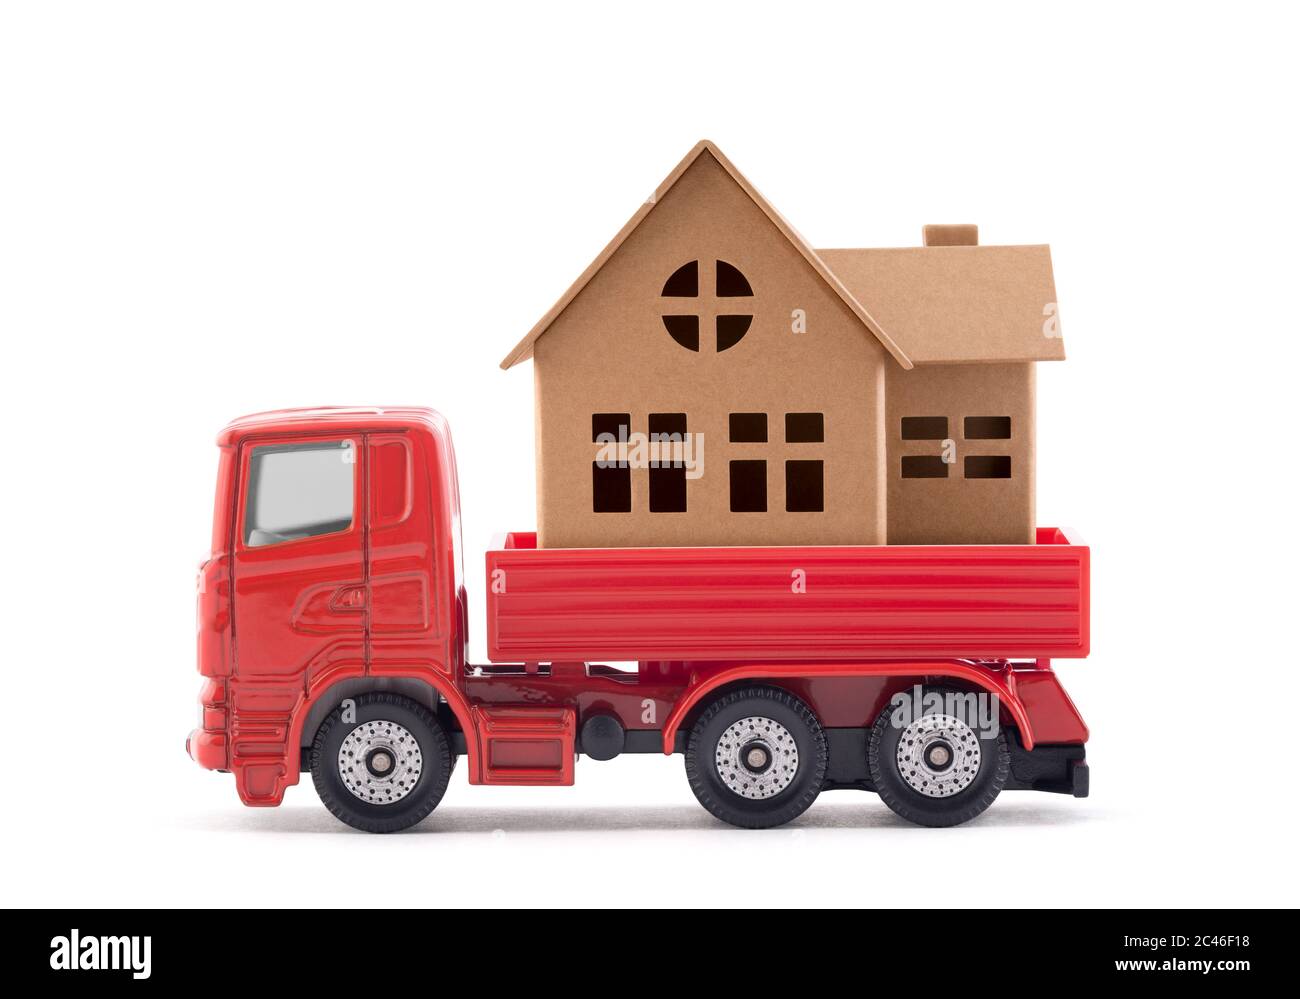 Red truck miniature with house on white background Stock Photo